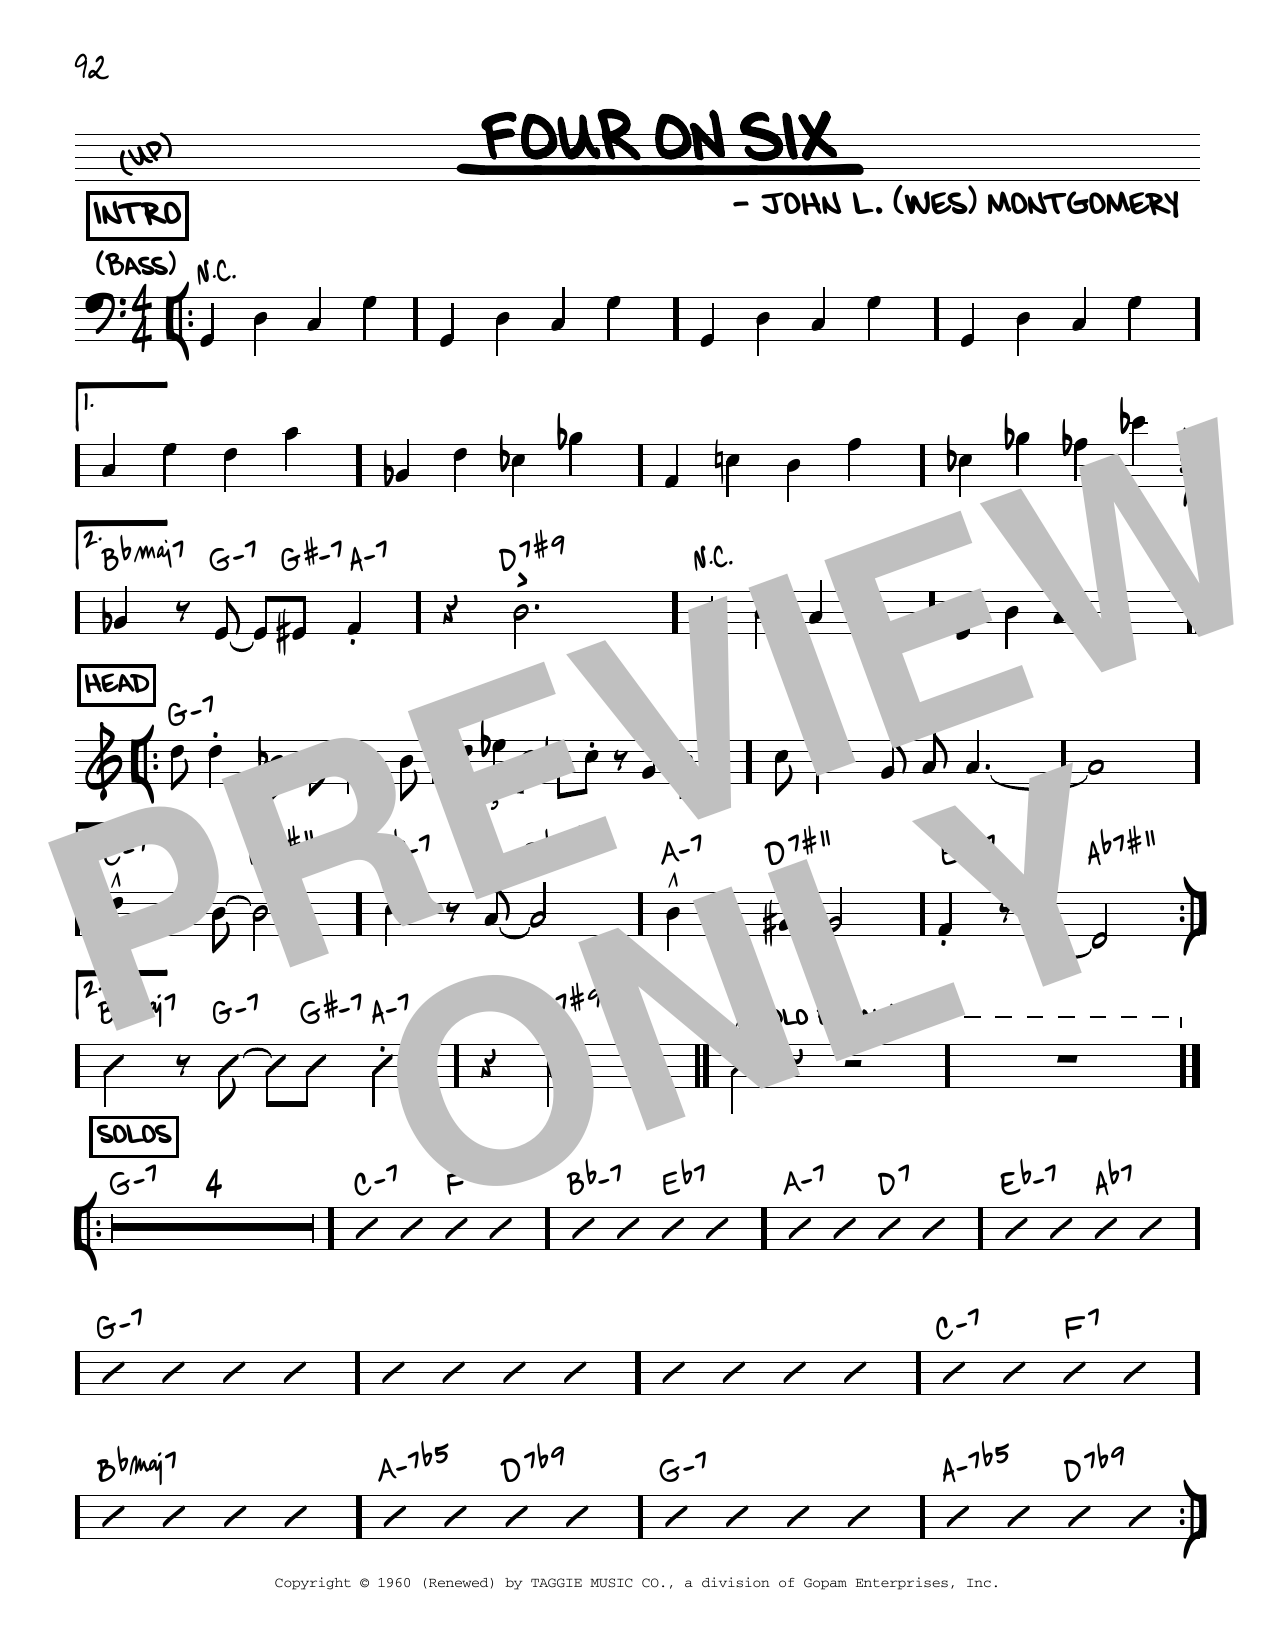 Download Wes Montgomery Four On Six Sheet Music